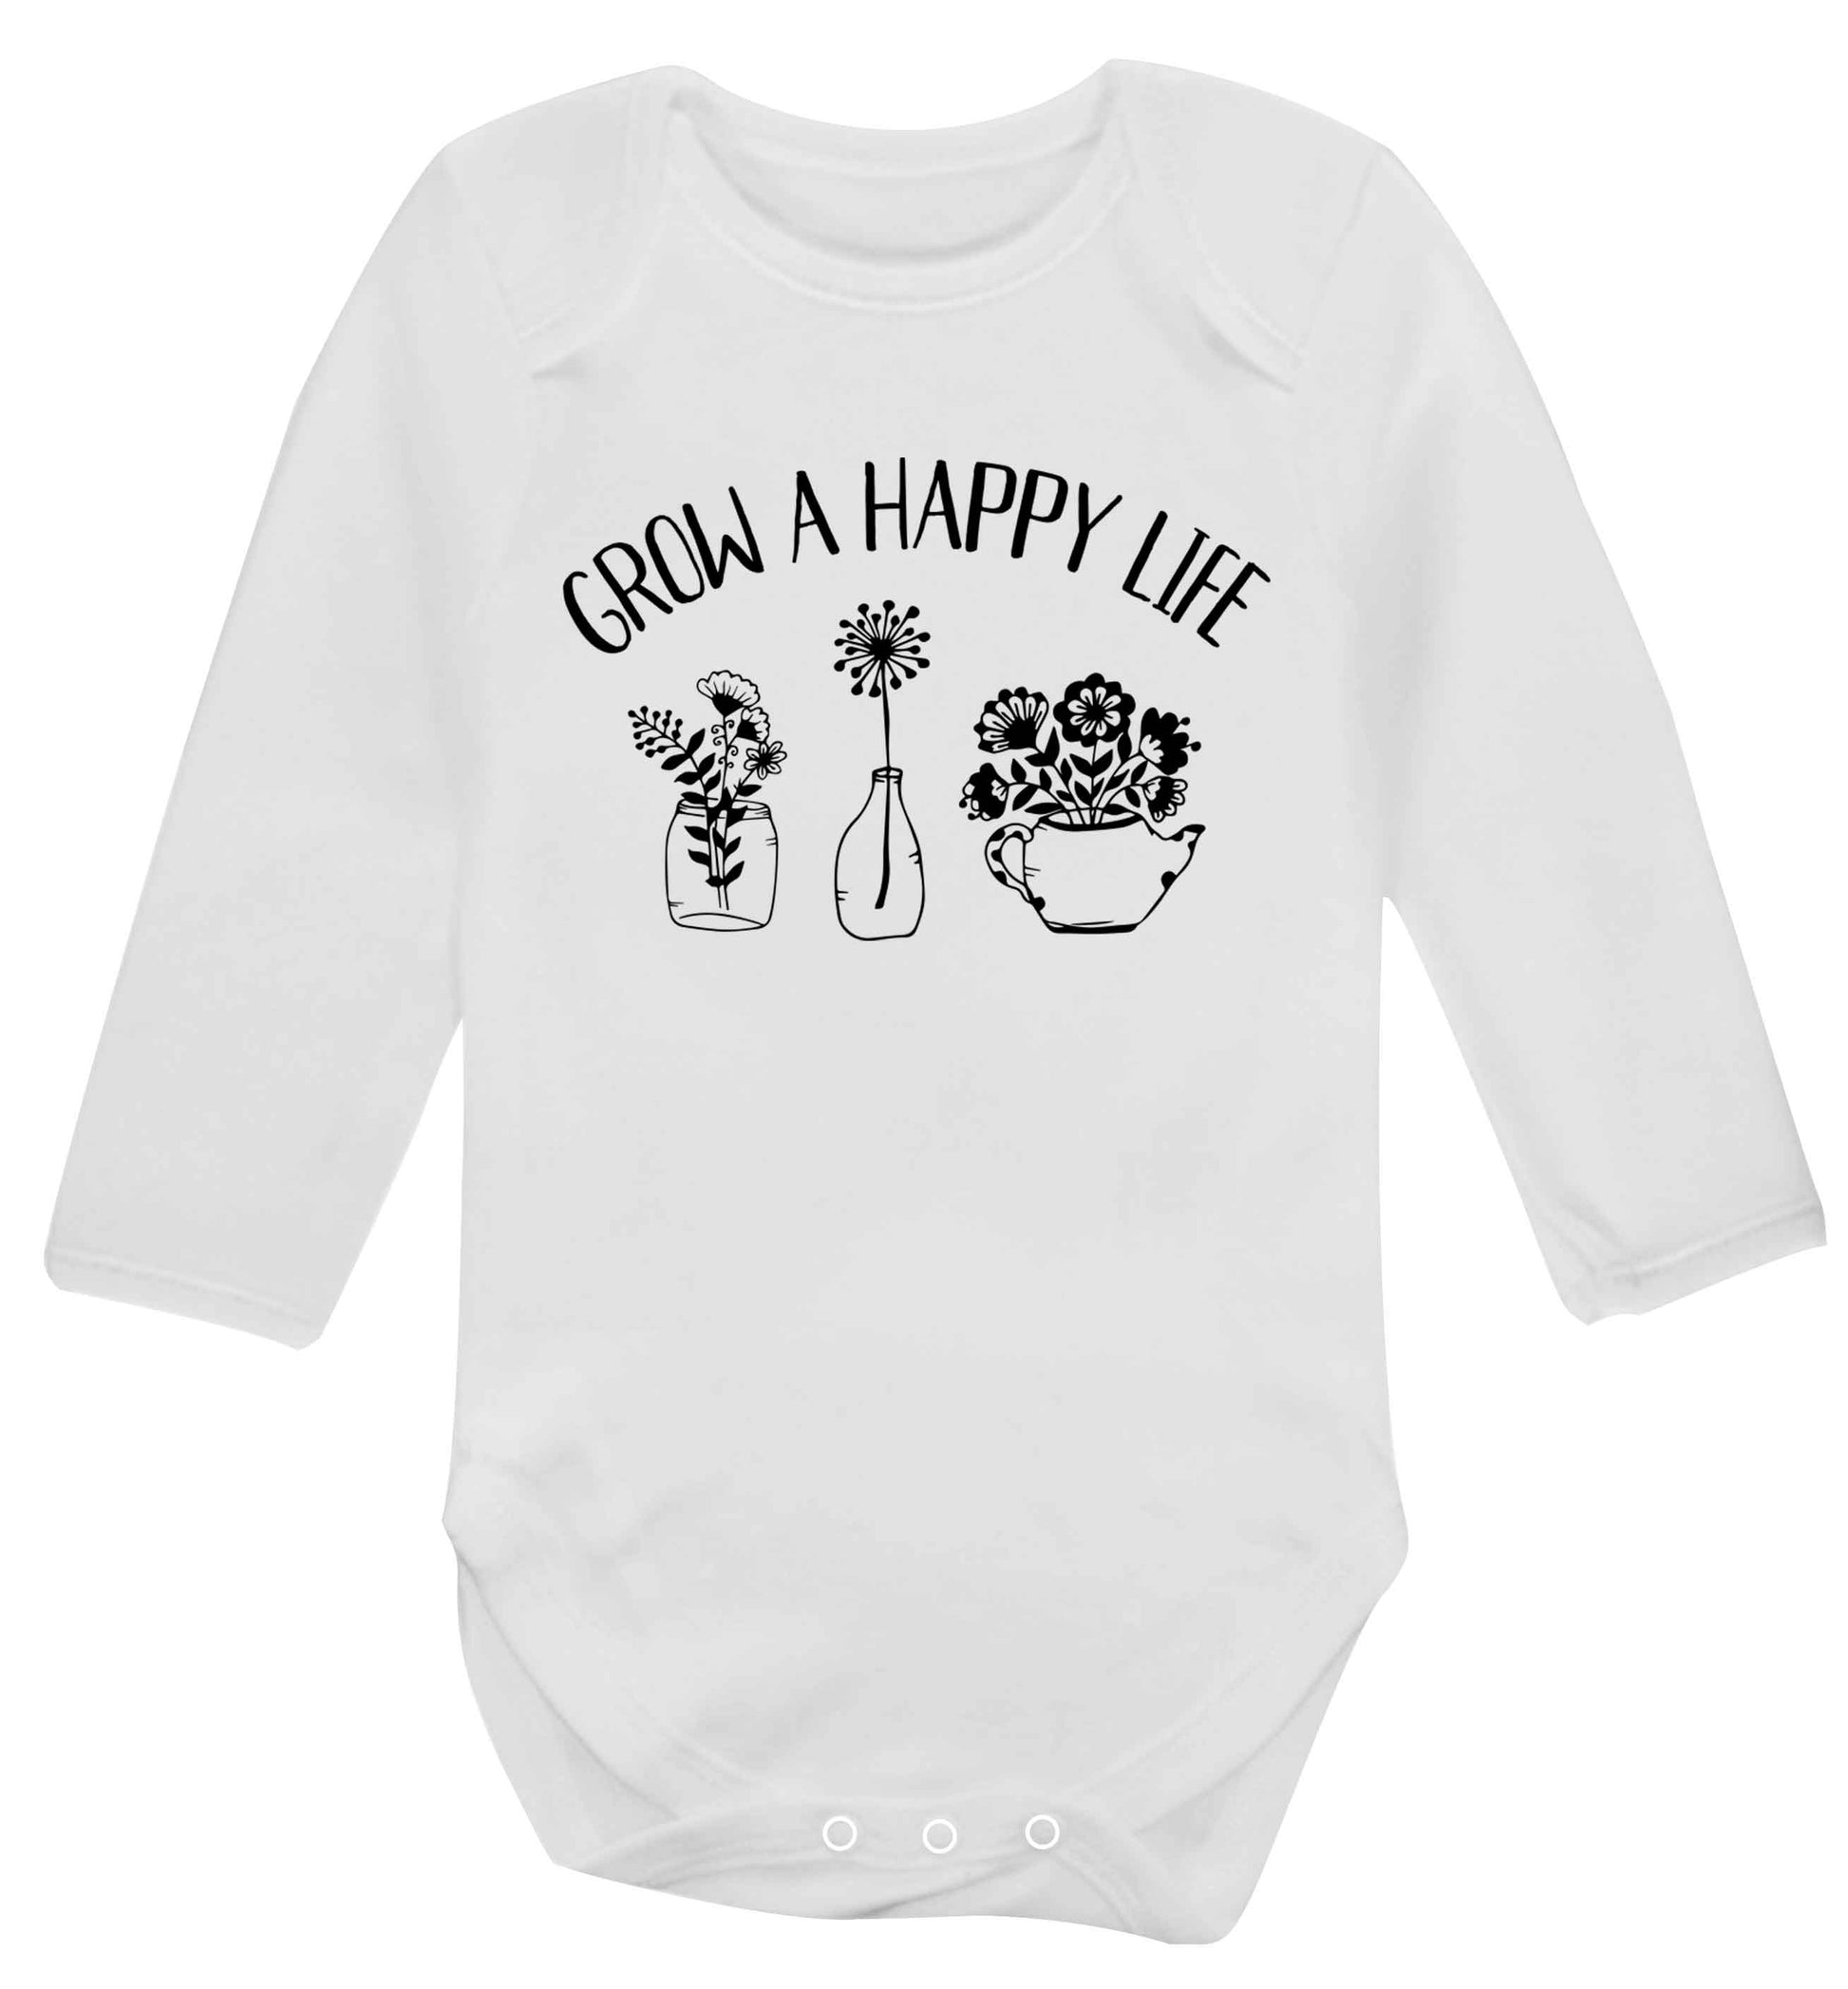 Grow a happy life Baby Vest long sleeved white 6-12 months